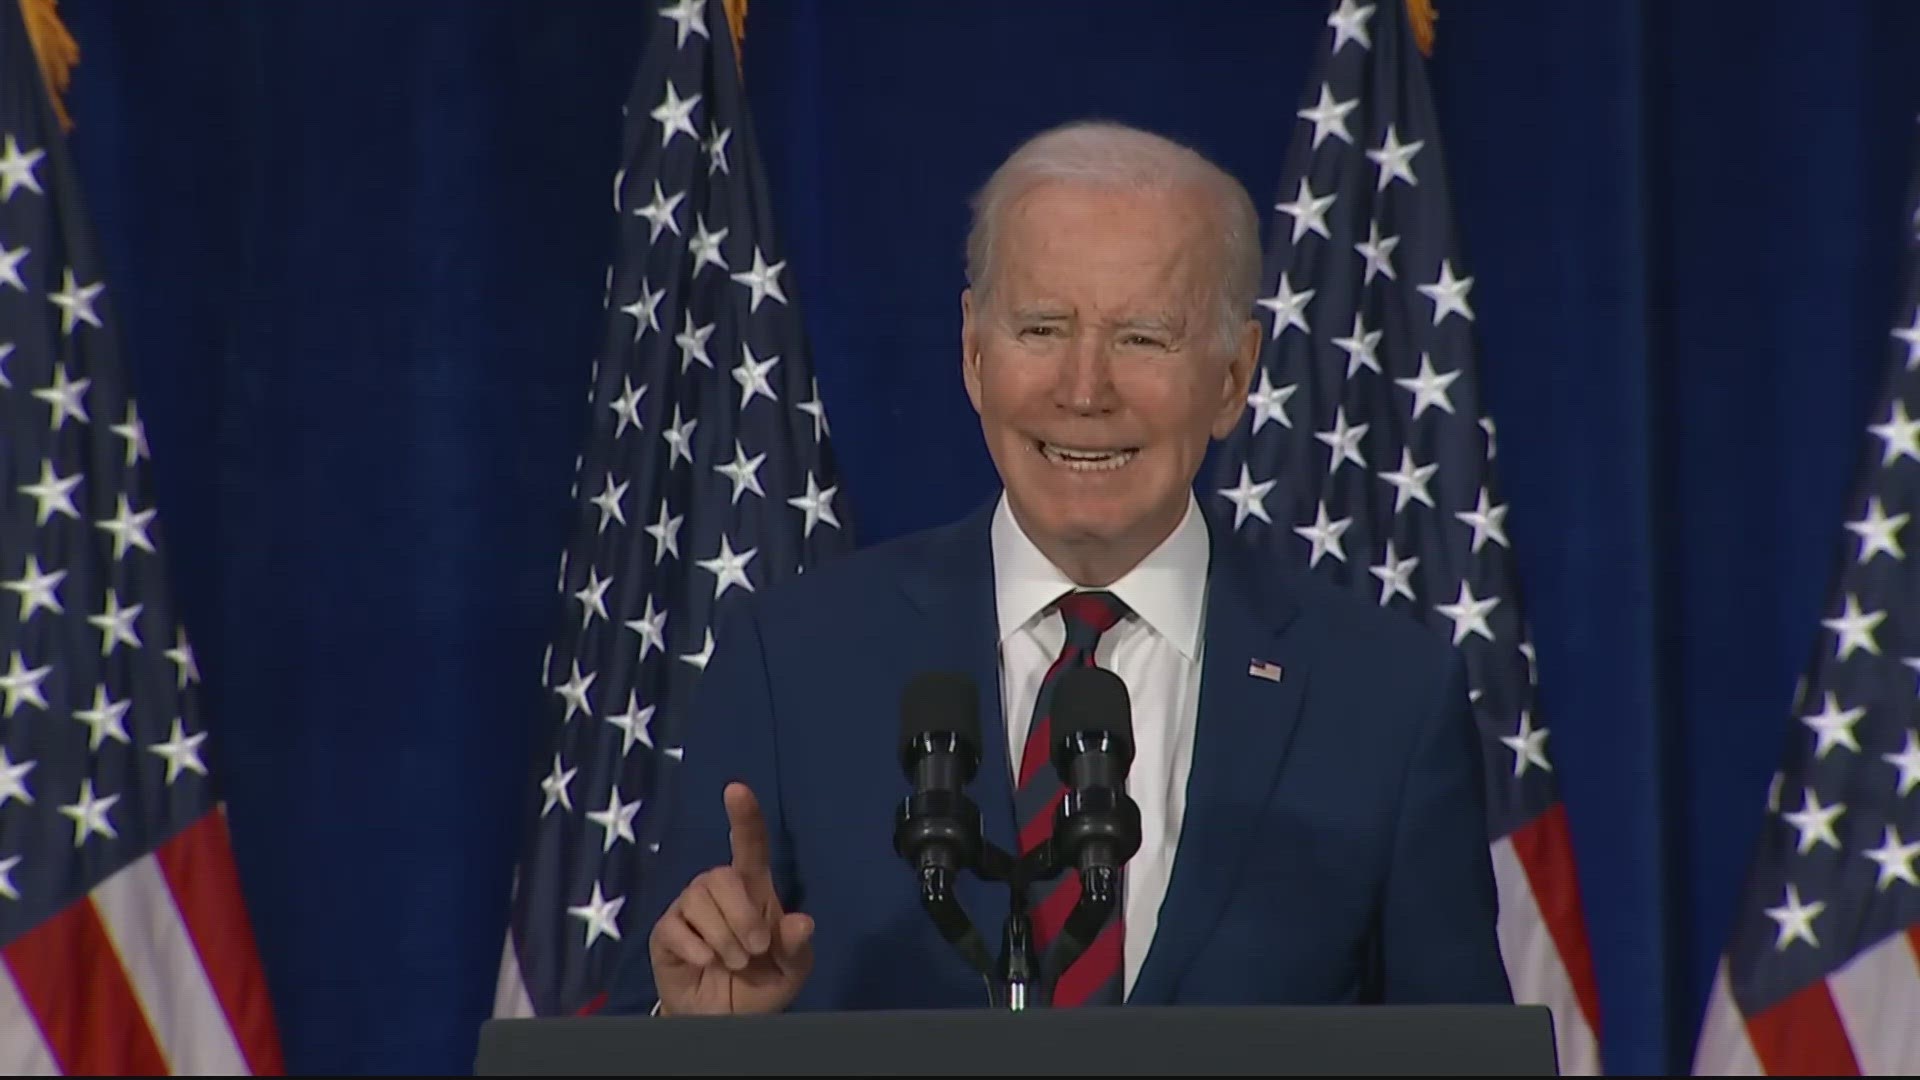 Biden addressed his latest efforts to curb violence during a speech in Monterey Park, California, where a gunman killed 11 during a Lunar New Year celebration.